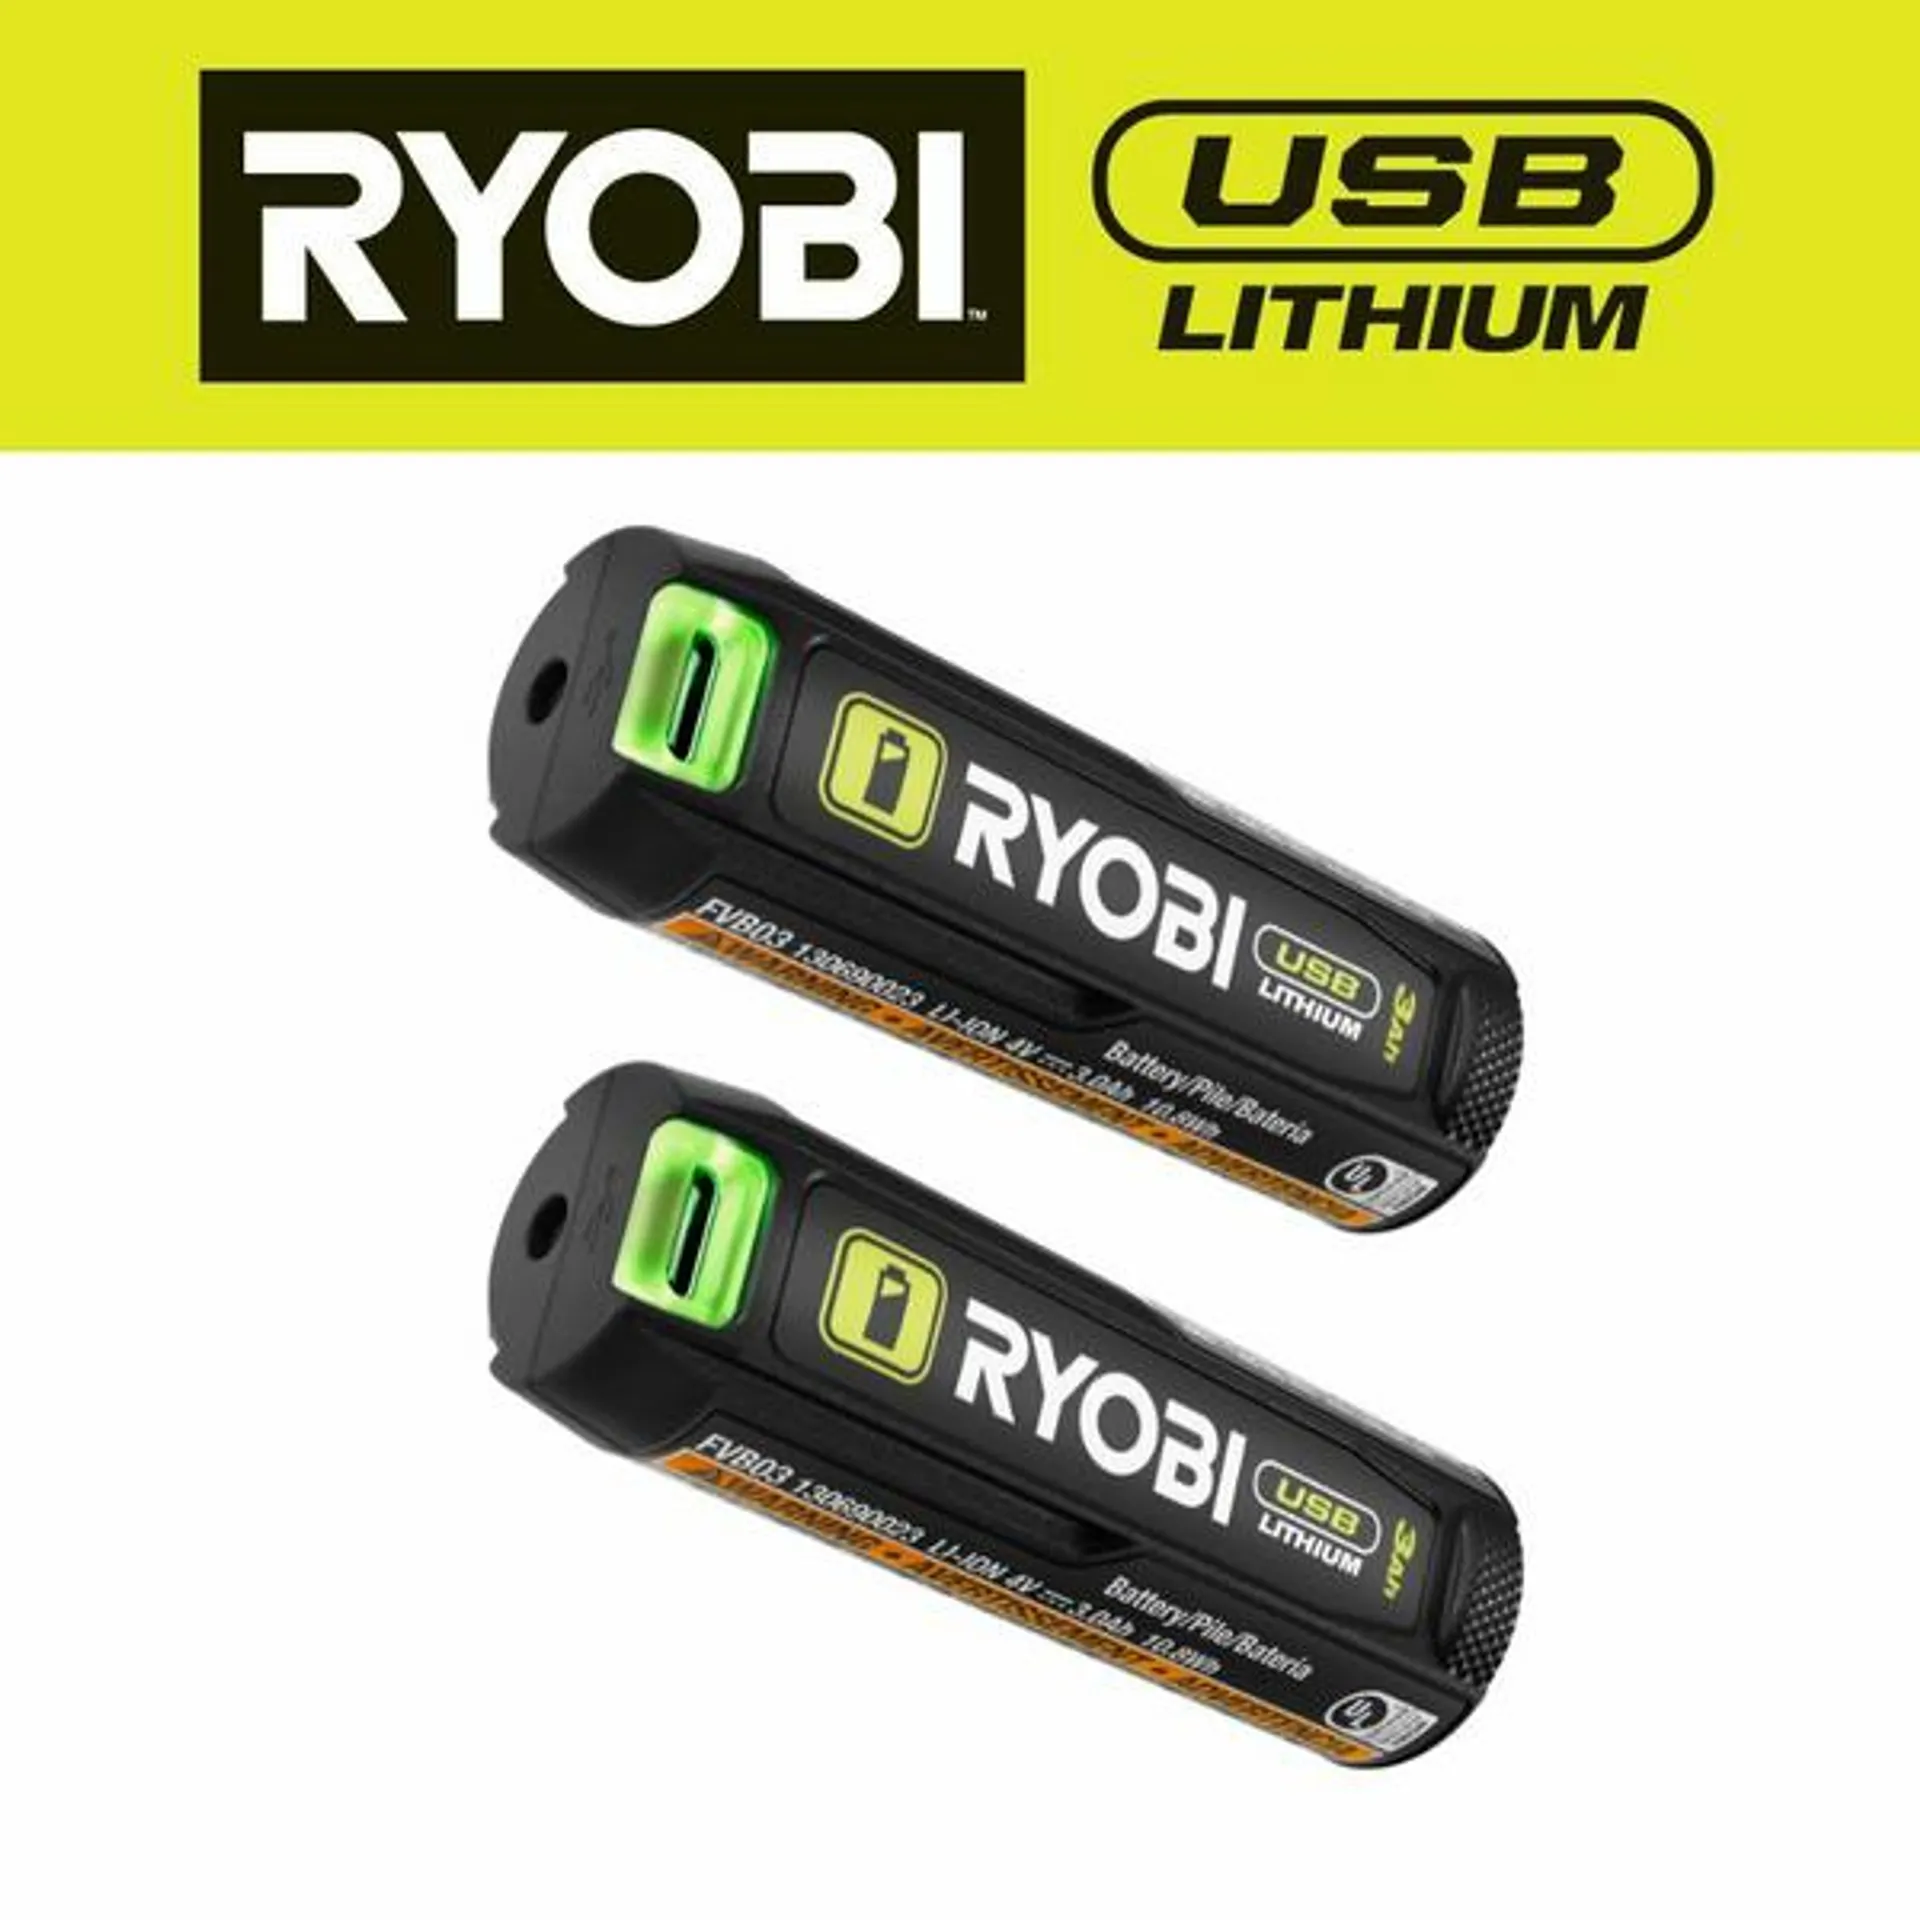 USB LITHIUM 3AH LITHIUM RECHARGEABLE BATTERY (2-PACK)